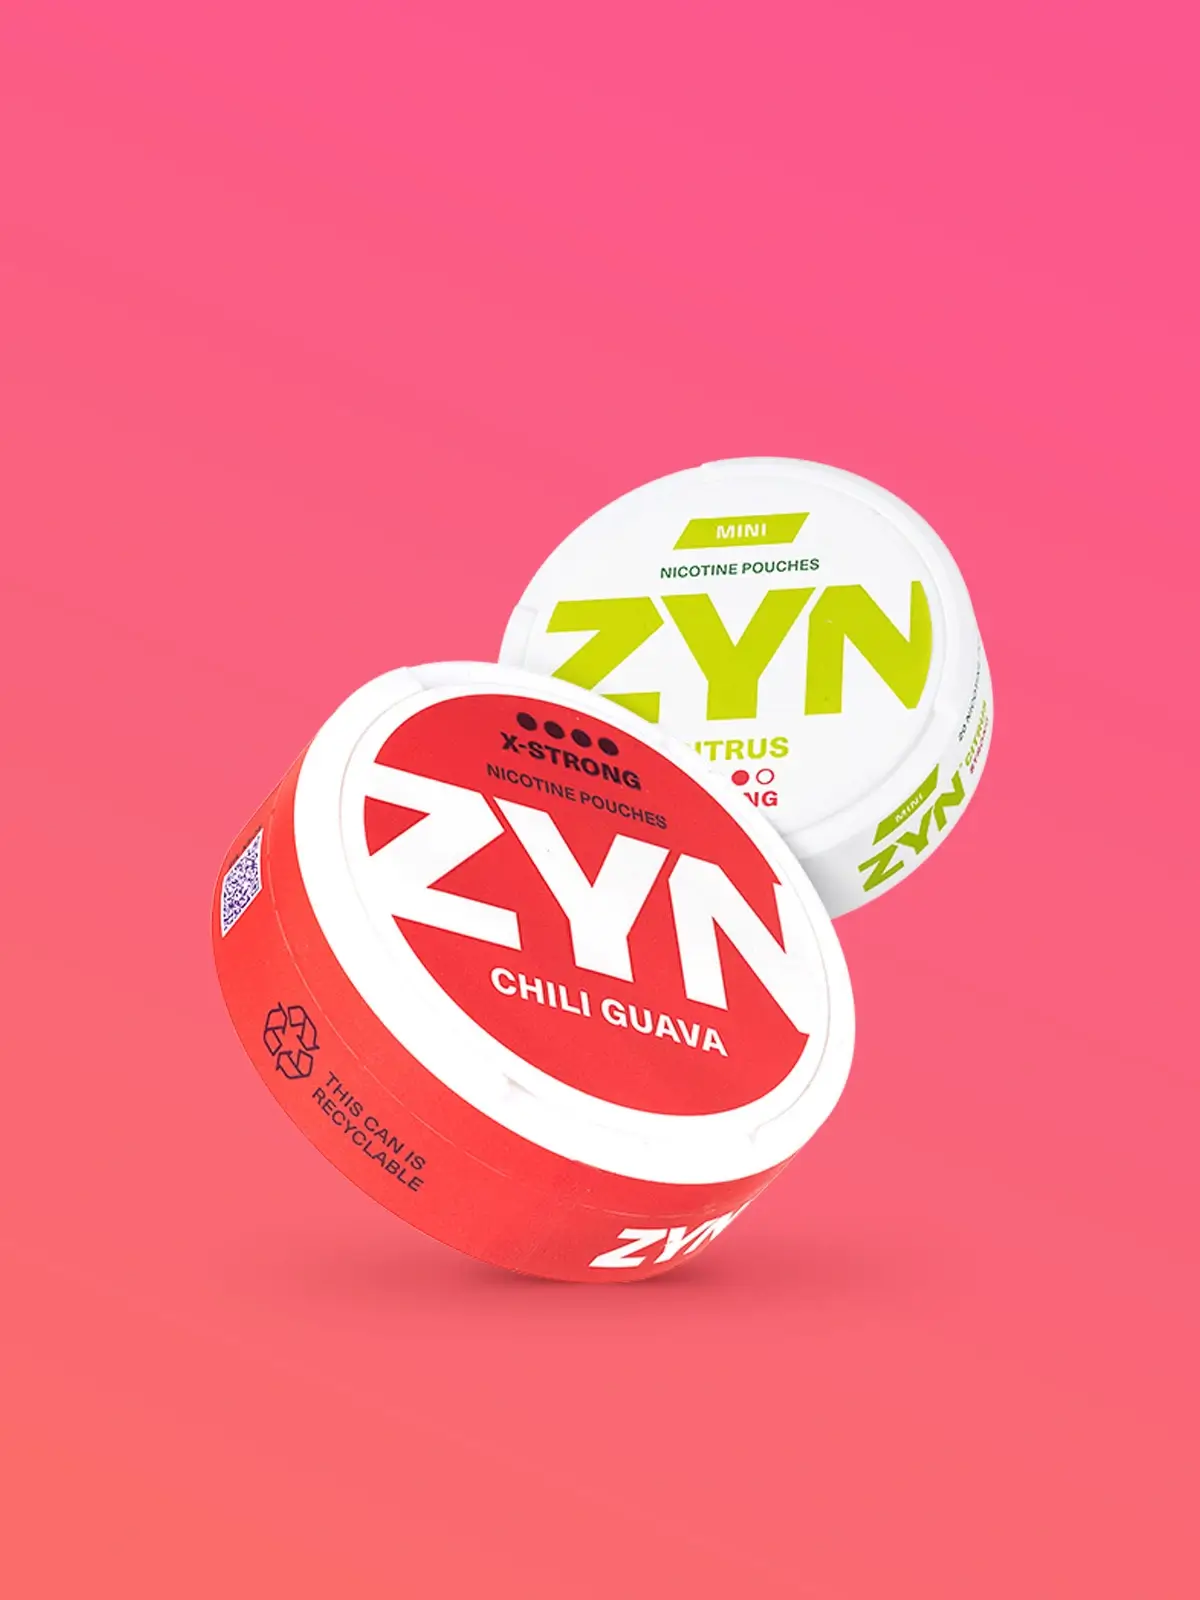 Two cans of ZYN nicotine pouches; one Chili Guava flavour and the other Citrus flavour, in front of a pink background